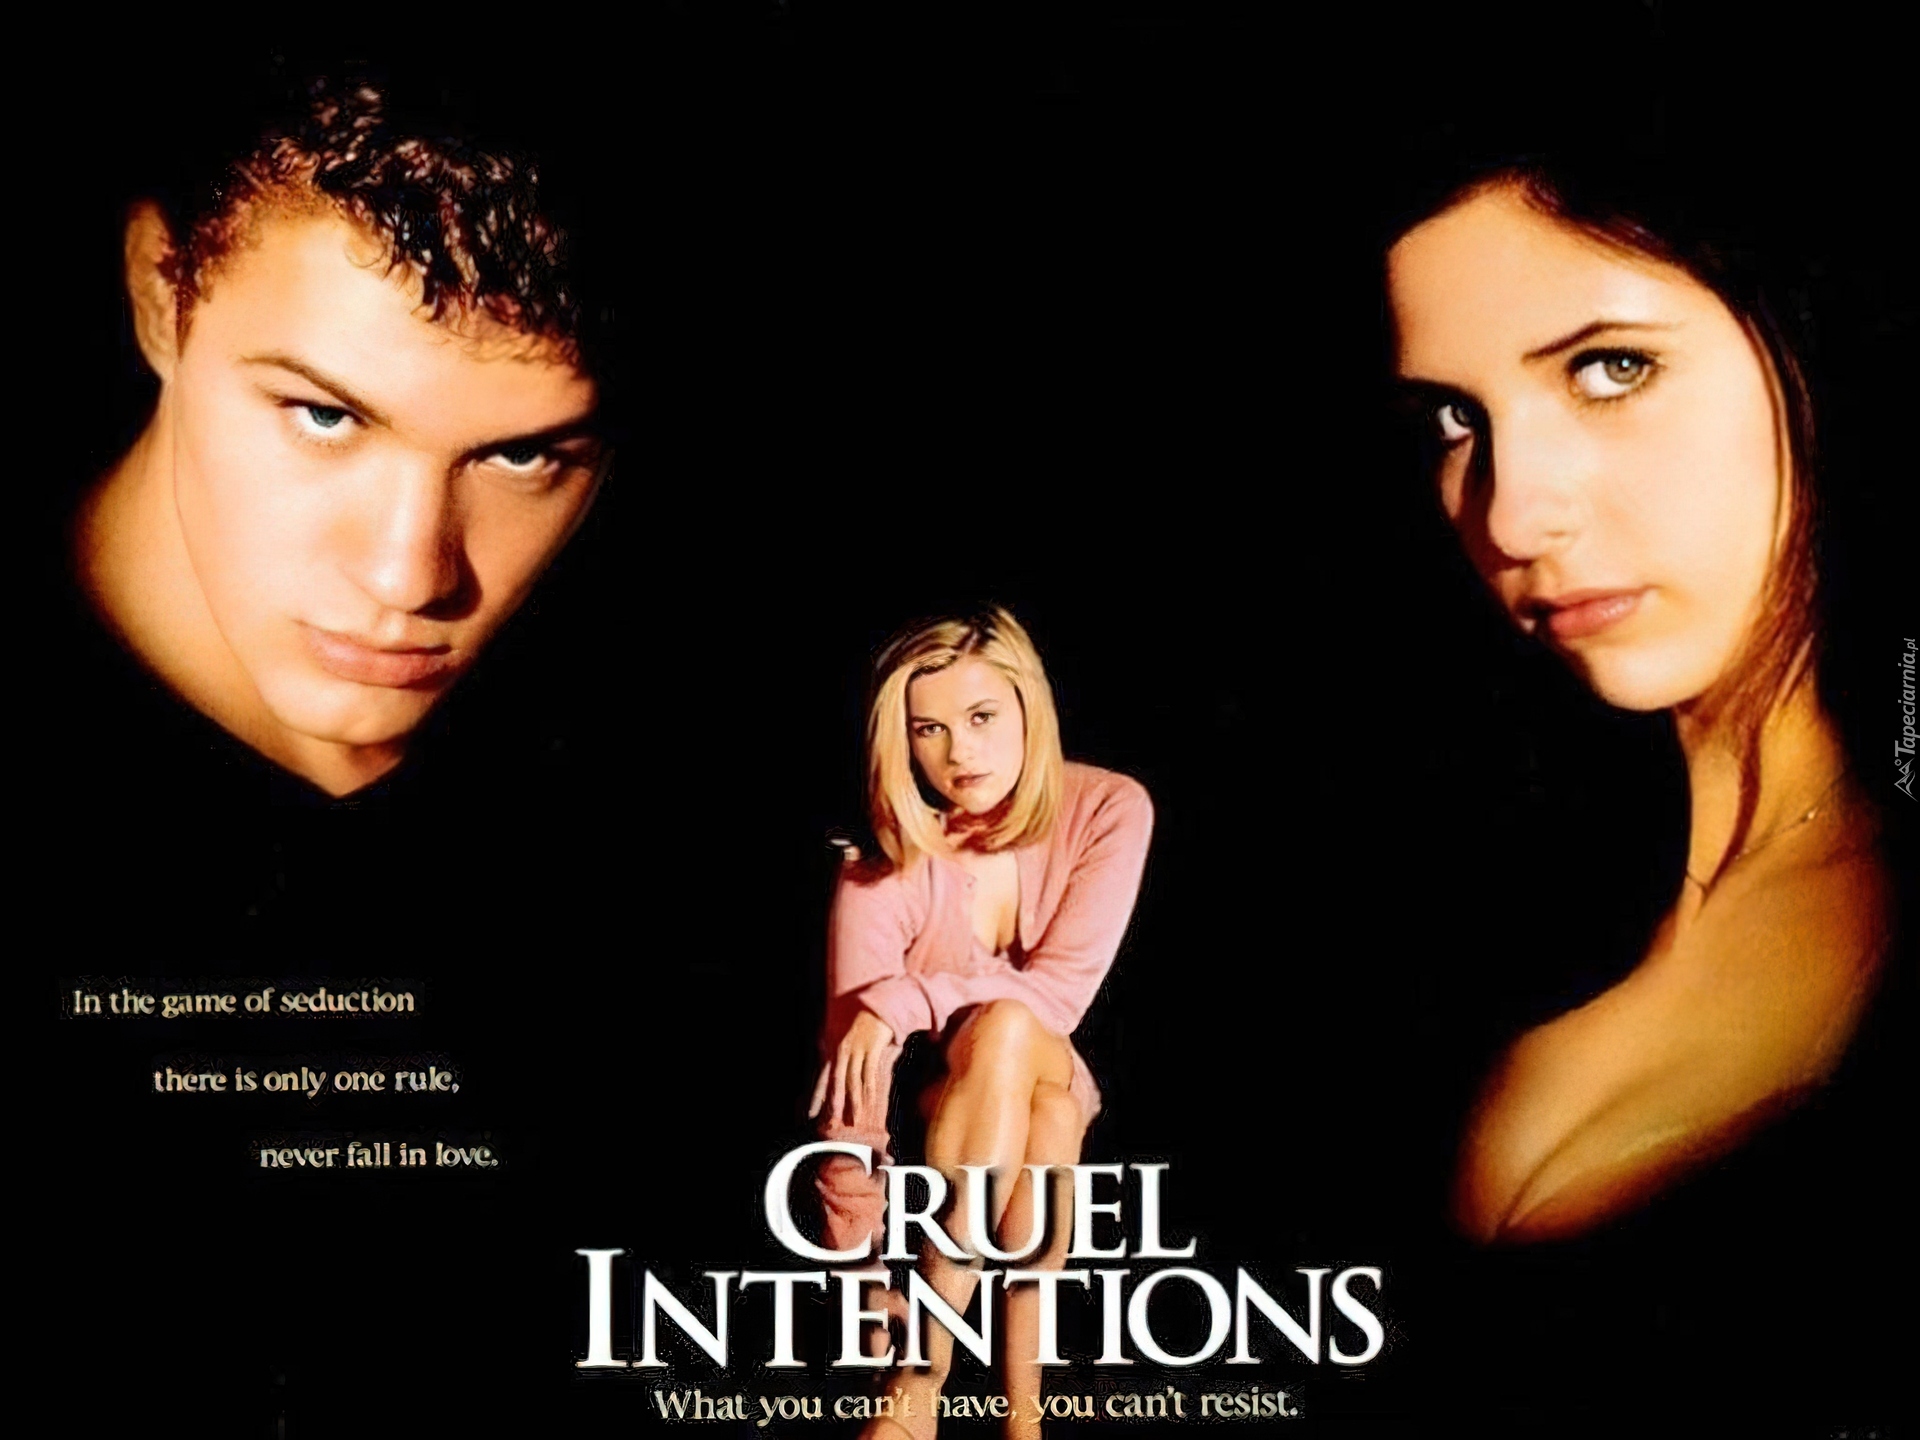 Cruel Intensions, Ryan Phillippe, Reese Witherspoon, Aktor